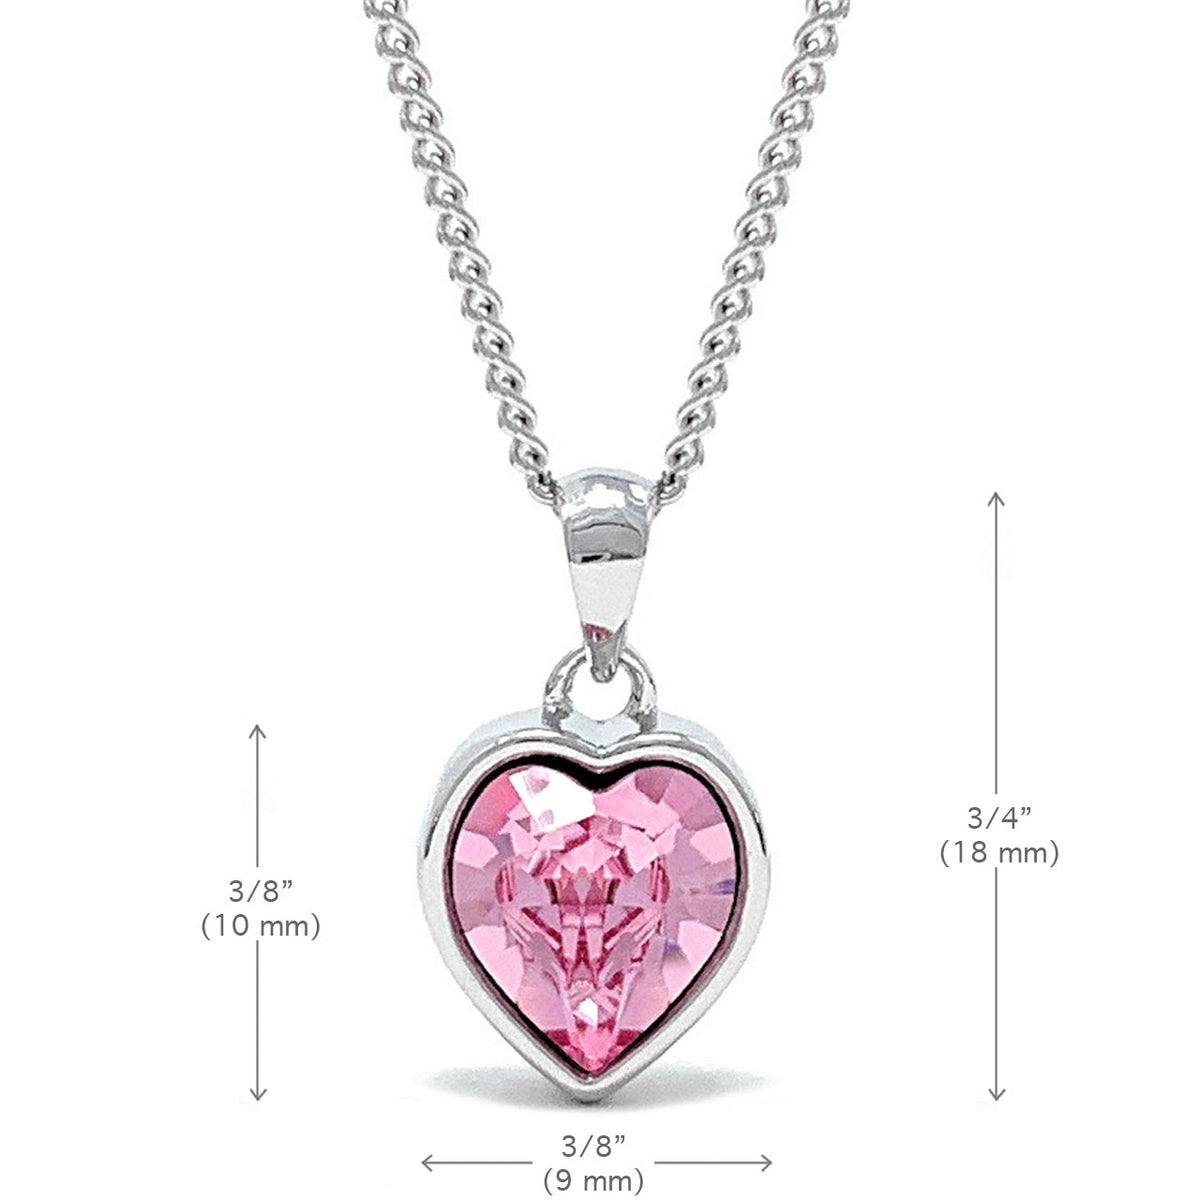 Lucia Pendant Necklace with Pink Light Rose Heart Crystals from Swarovski Silver Toned Rhodium Plated - Ed Heart